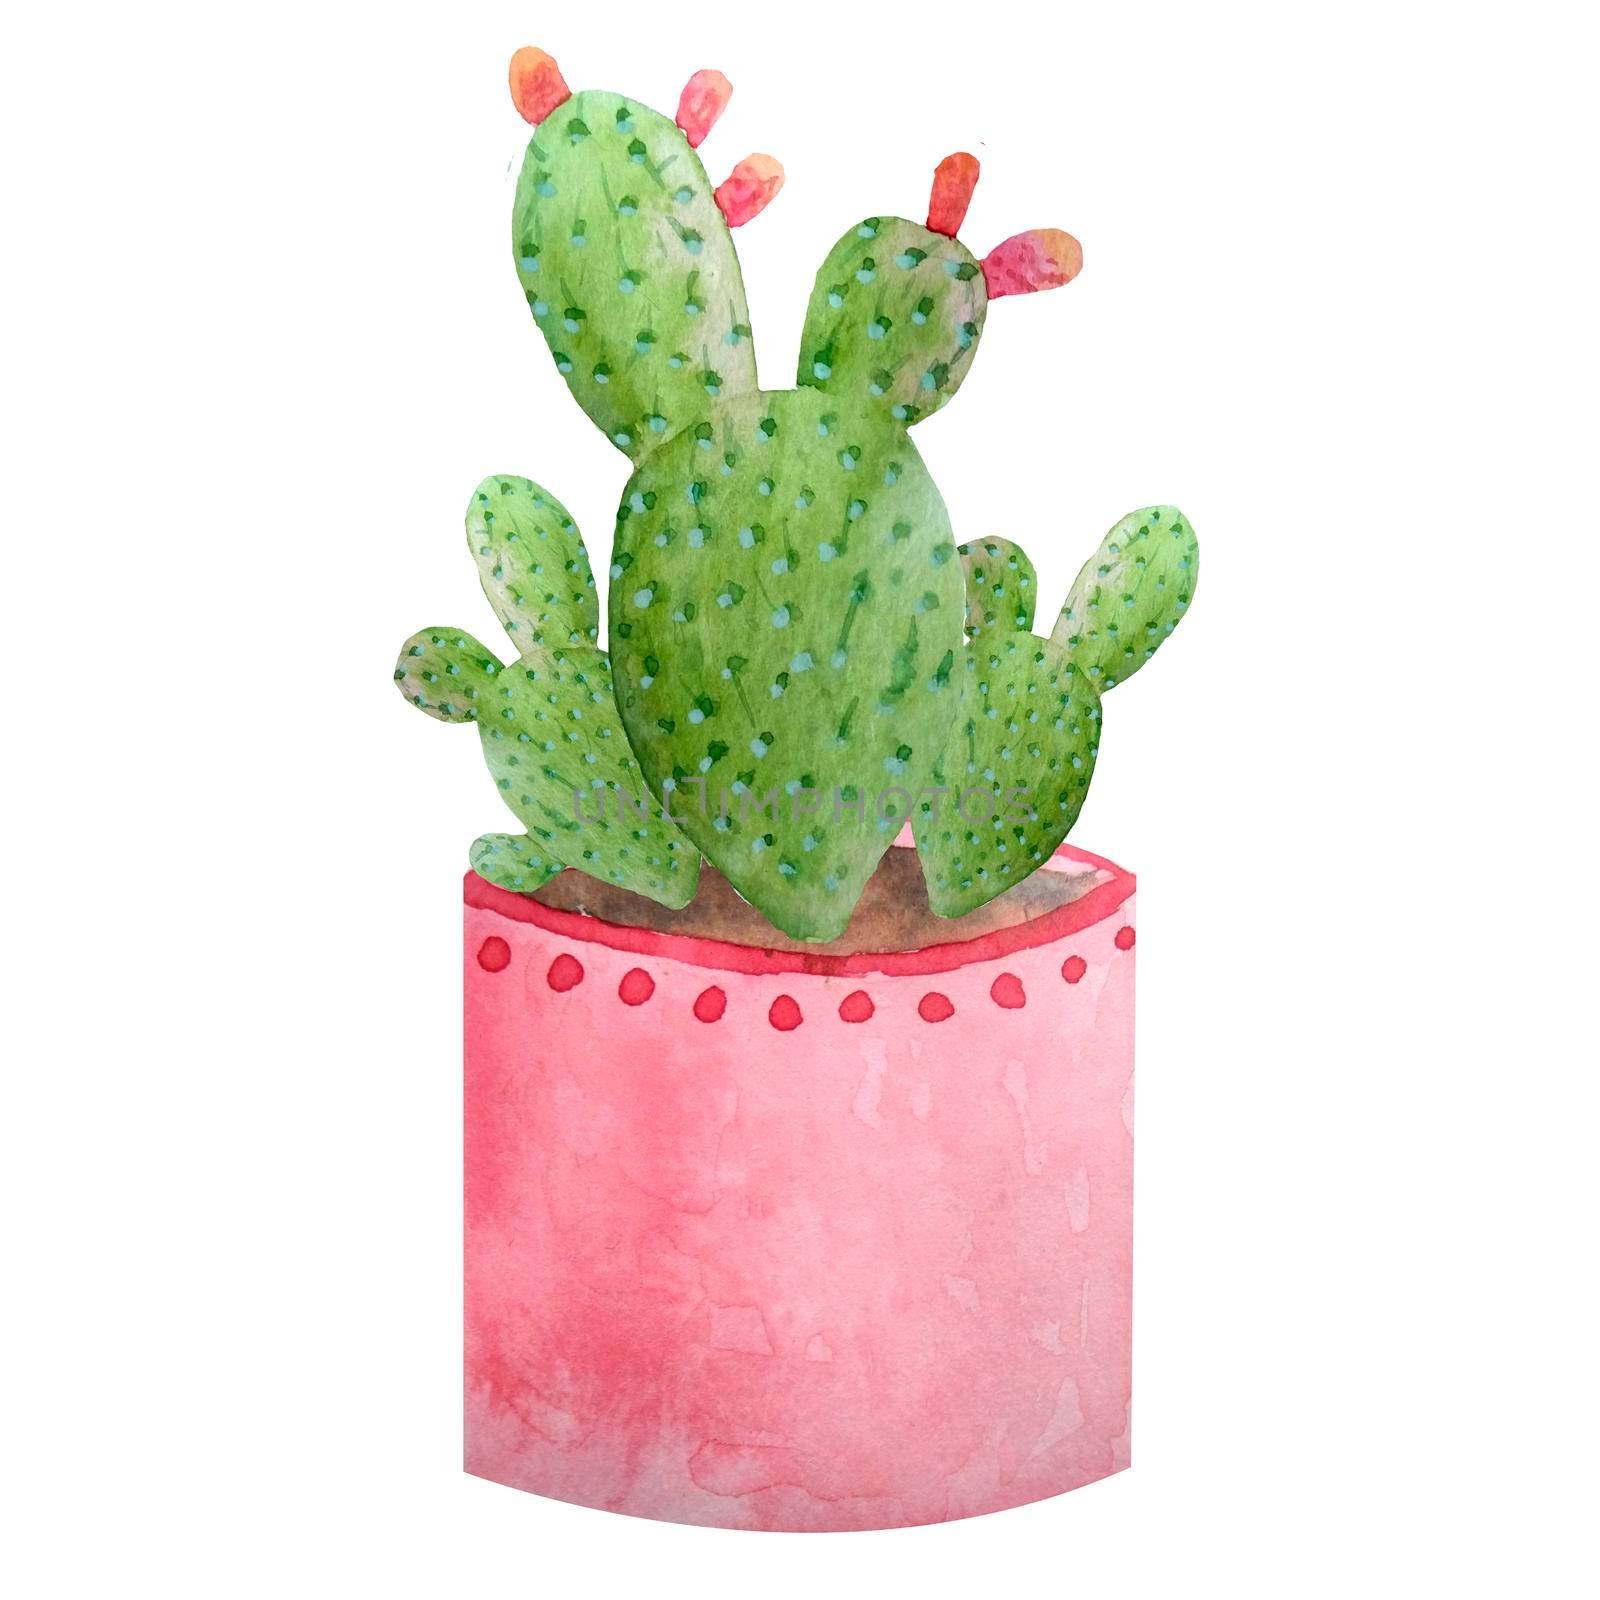 Watercolor cactus cacti succulent in ceramic pot. Potted house green natural plants exotic tropical flowers. Interior decoration botanical illustration vibrant design print. by Lagmar